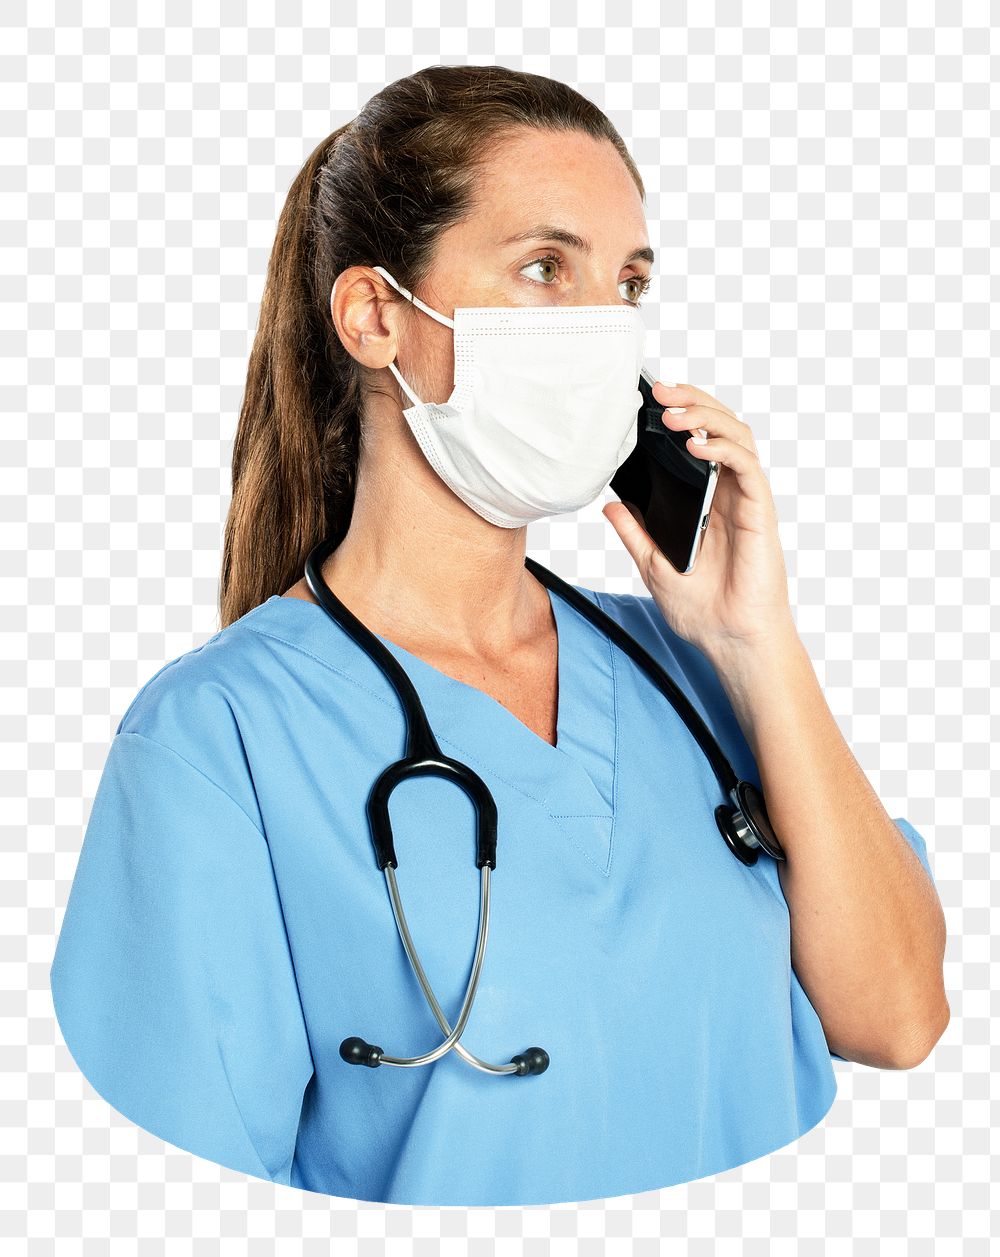 Female doctor png on phone, transparent background